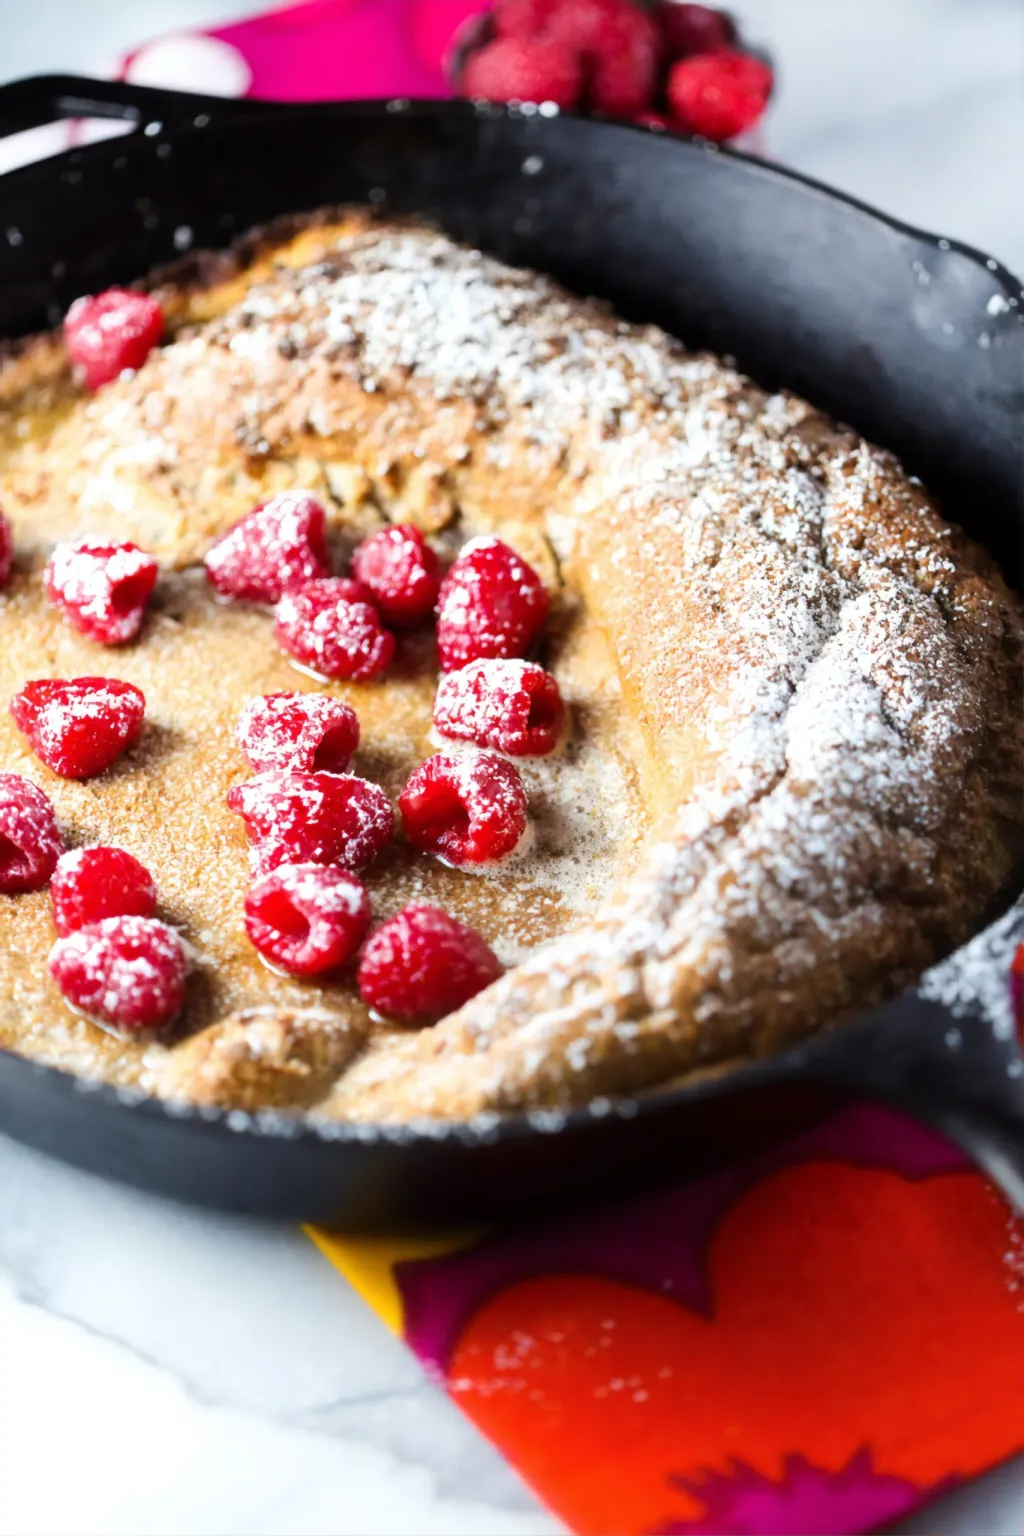 A high protein breakfast skillet filled with raspberry pancakes and powdered sugar.